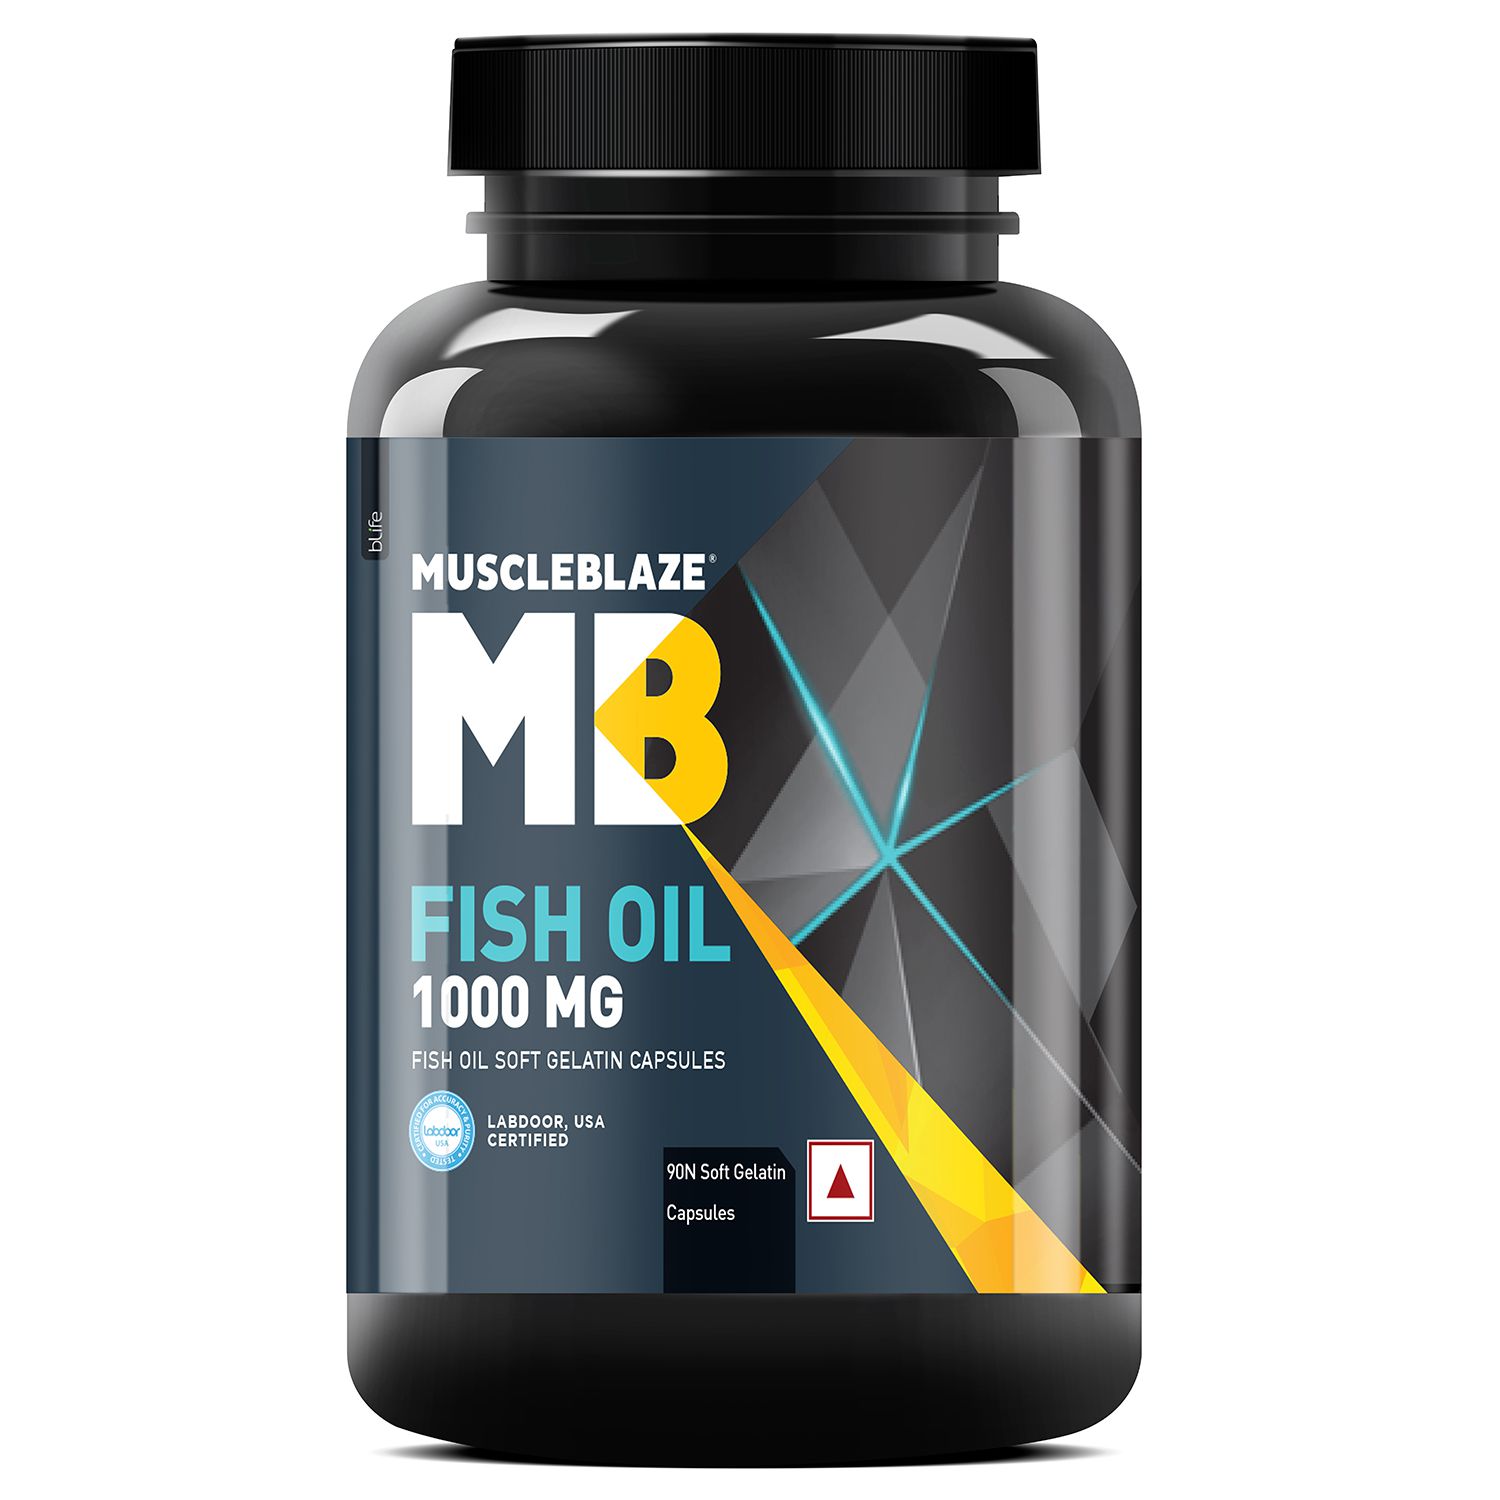 MuscleBlaze Omega 3 Fish Oil 1000 mg, India's Only Labdoor USA Certified for Purity & Accuracy with 180 mg EPA and 120 mg DHA, 90 Capsules